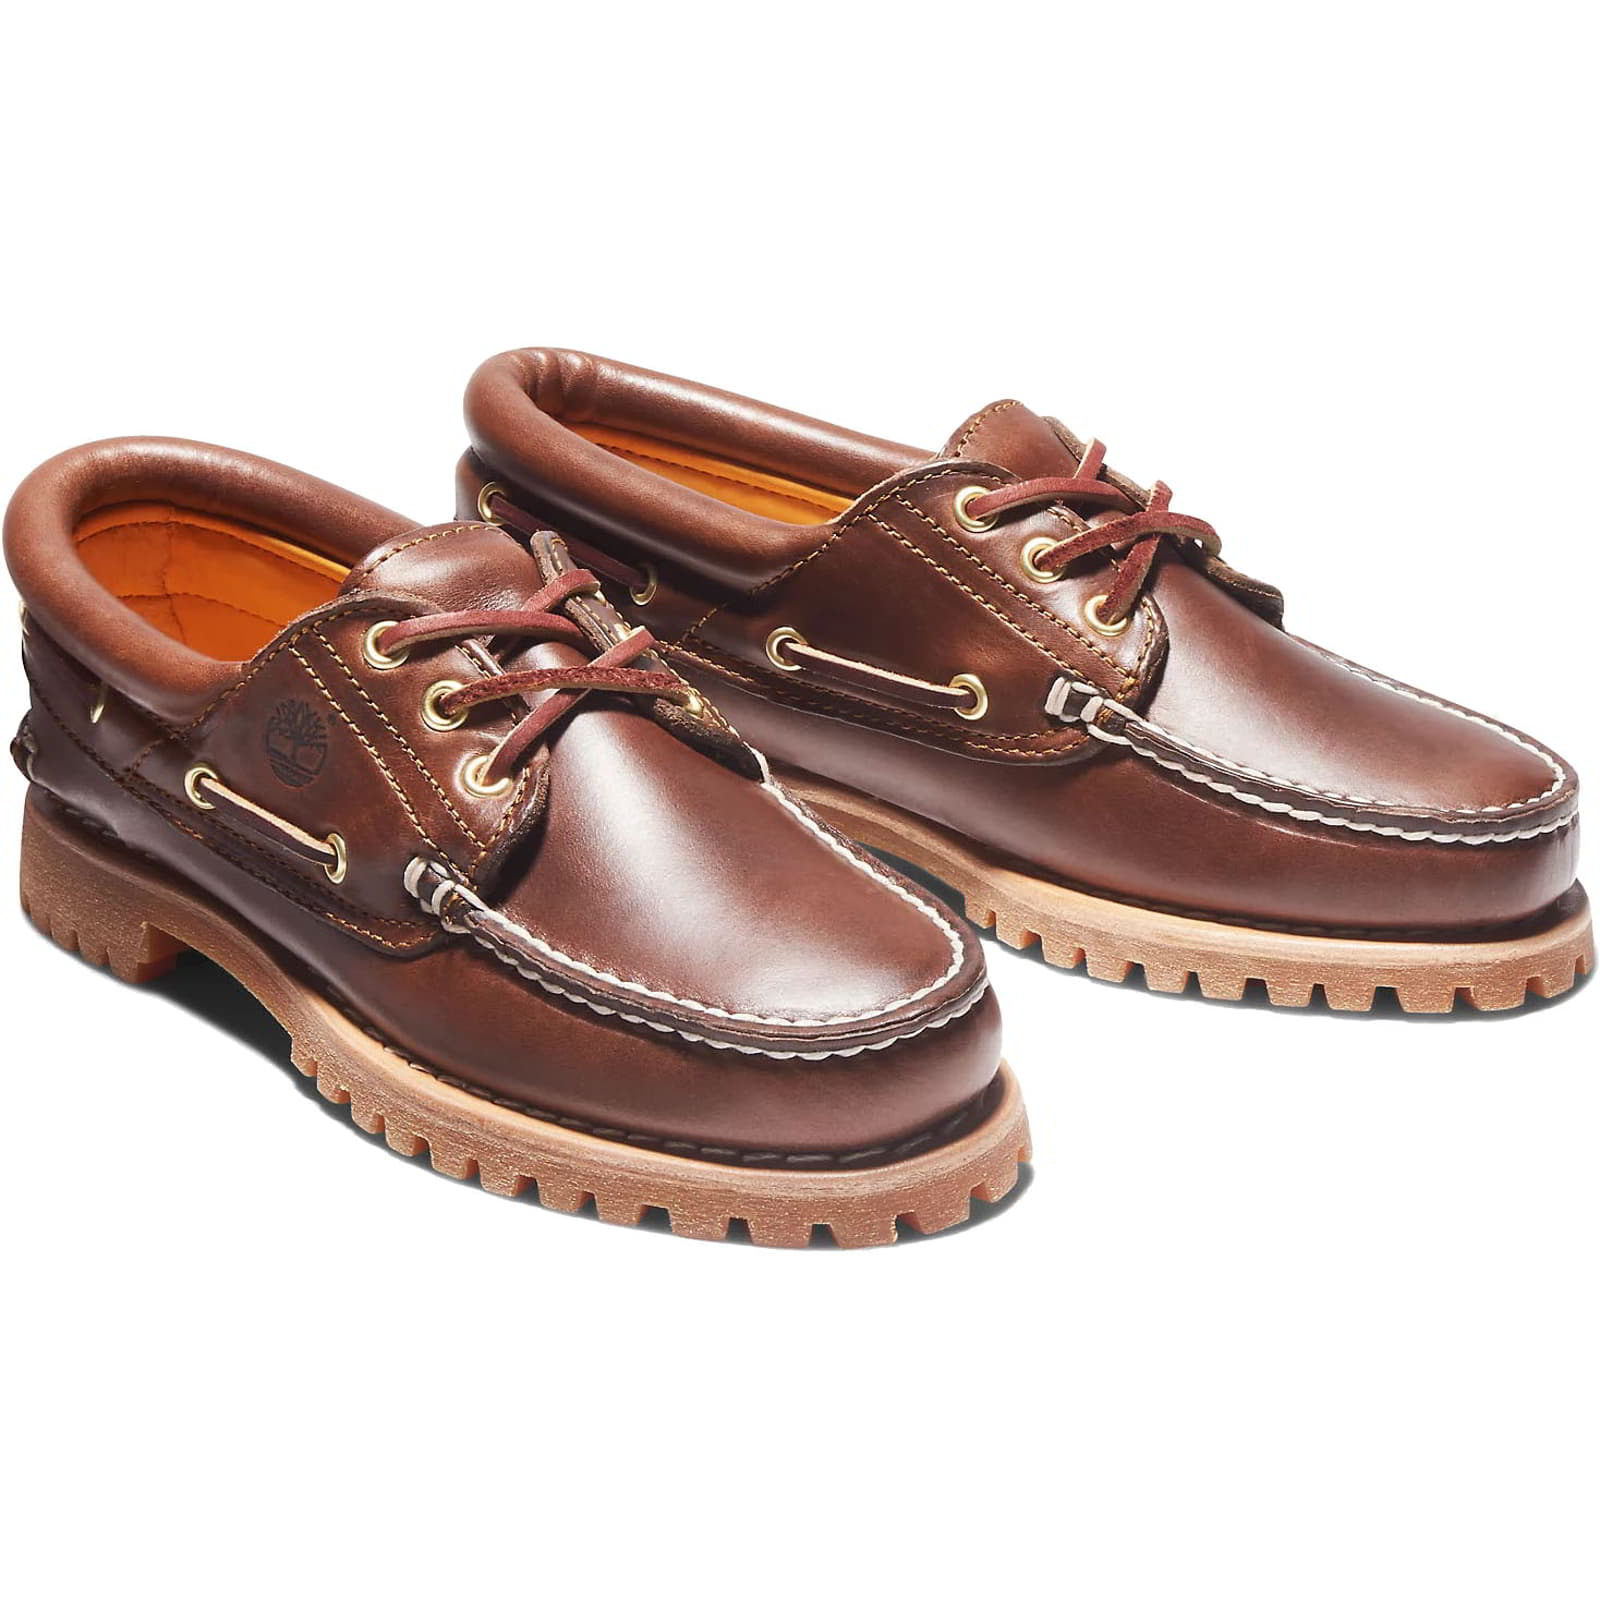 Timberland Women's Noreen Heritage Boat Shoes - UK 8 / US 10